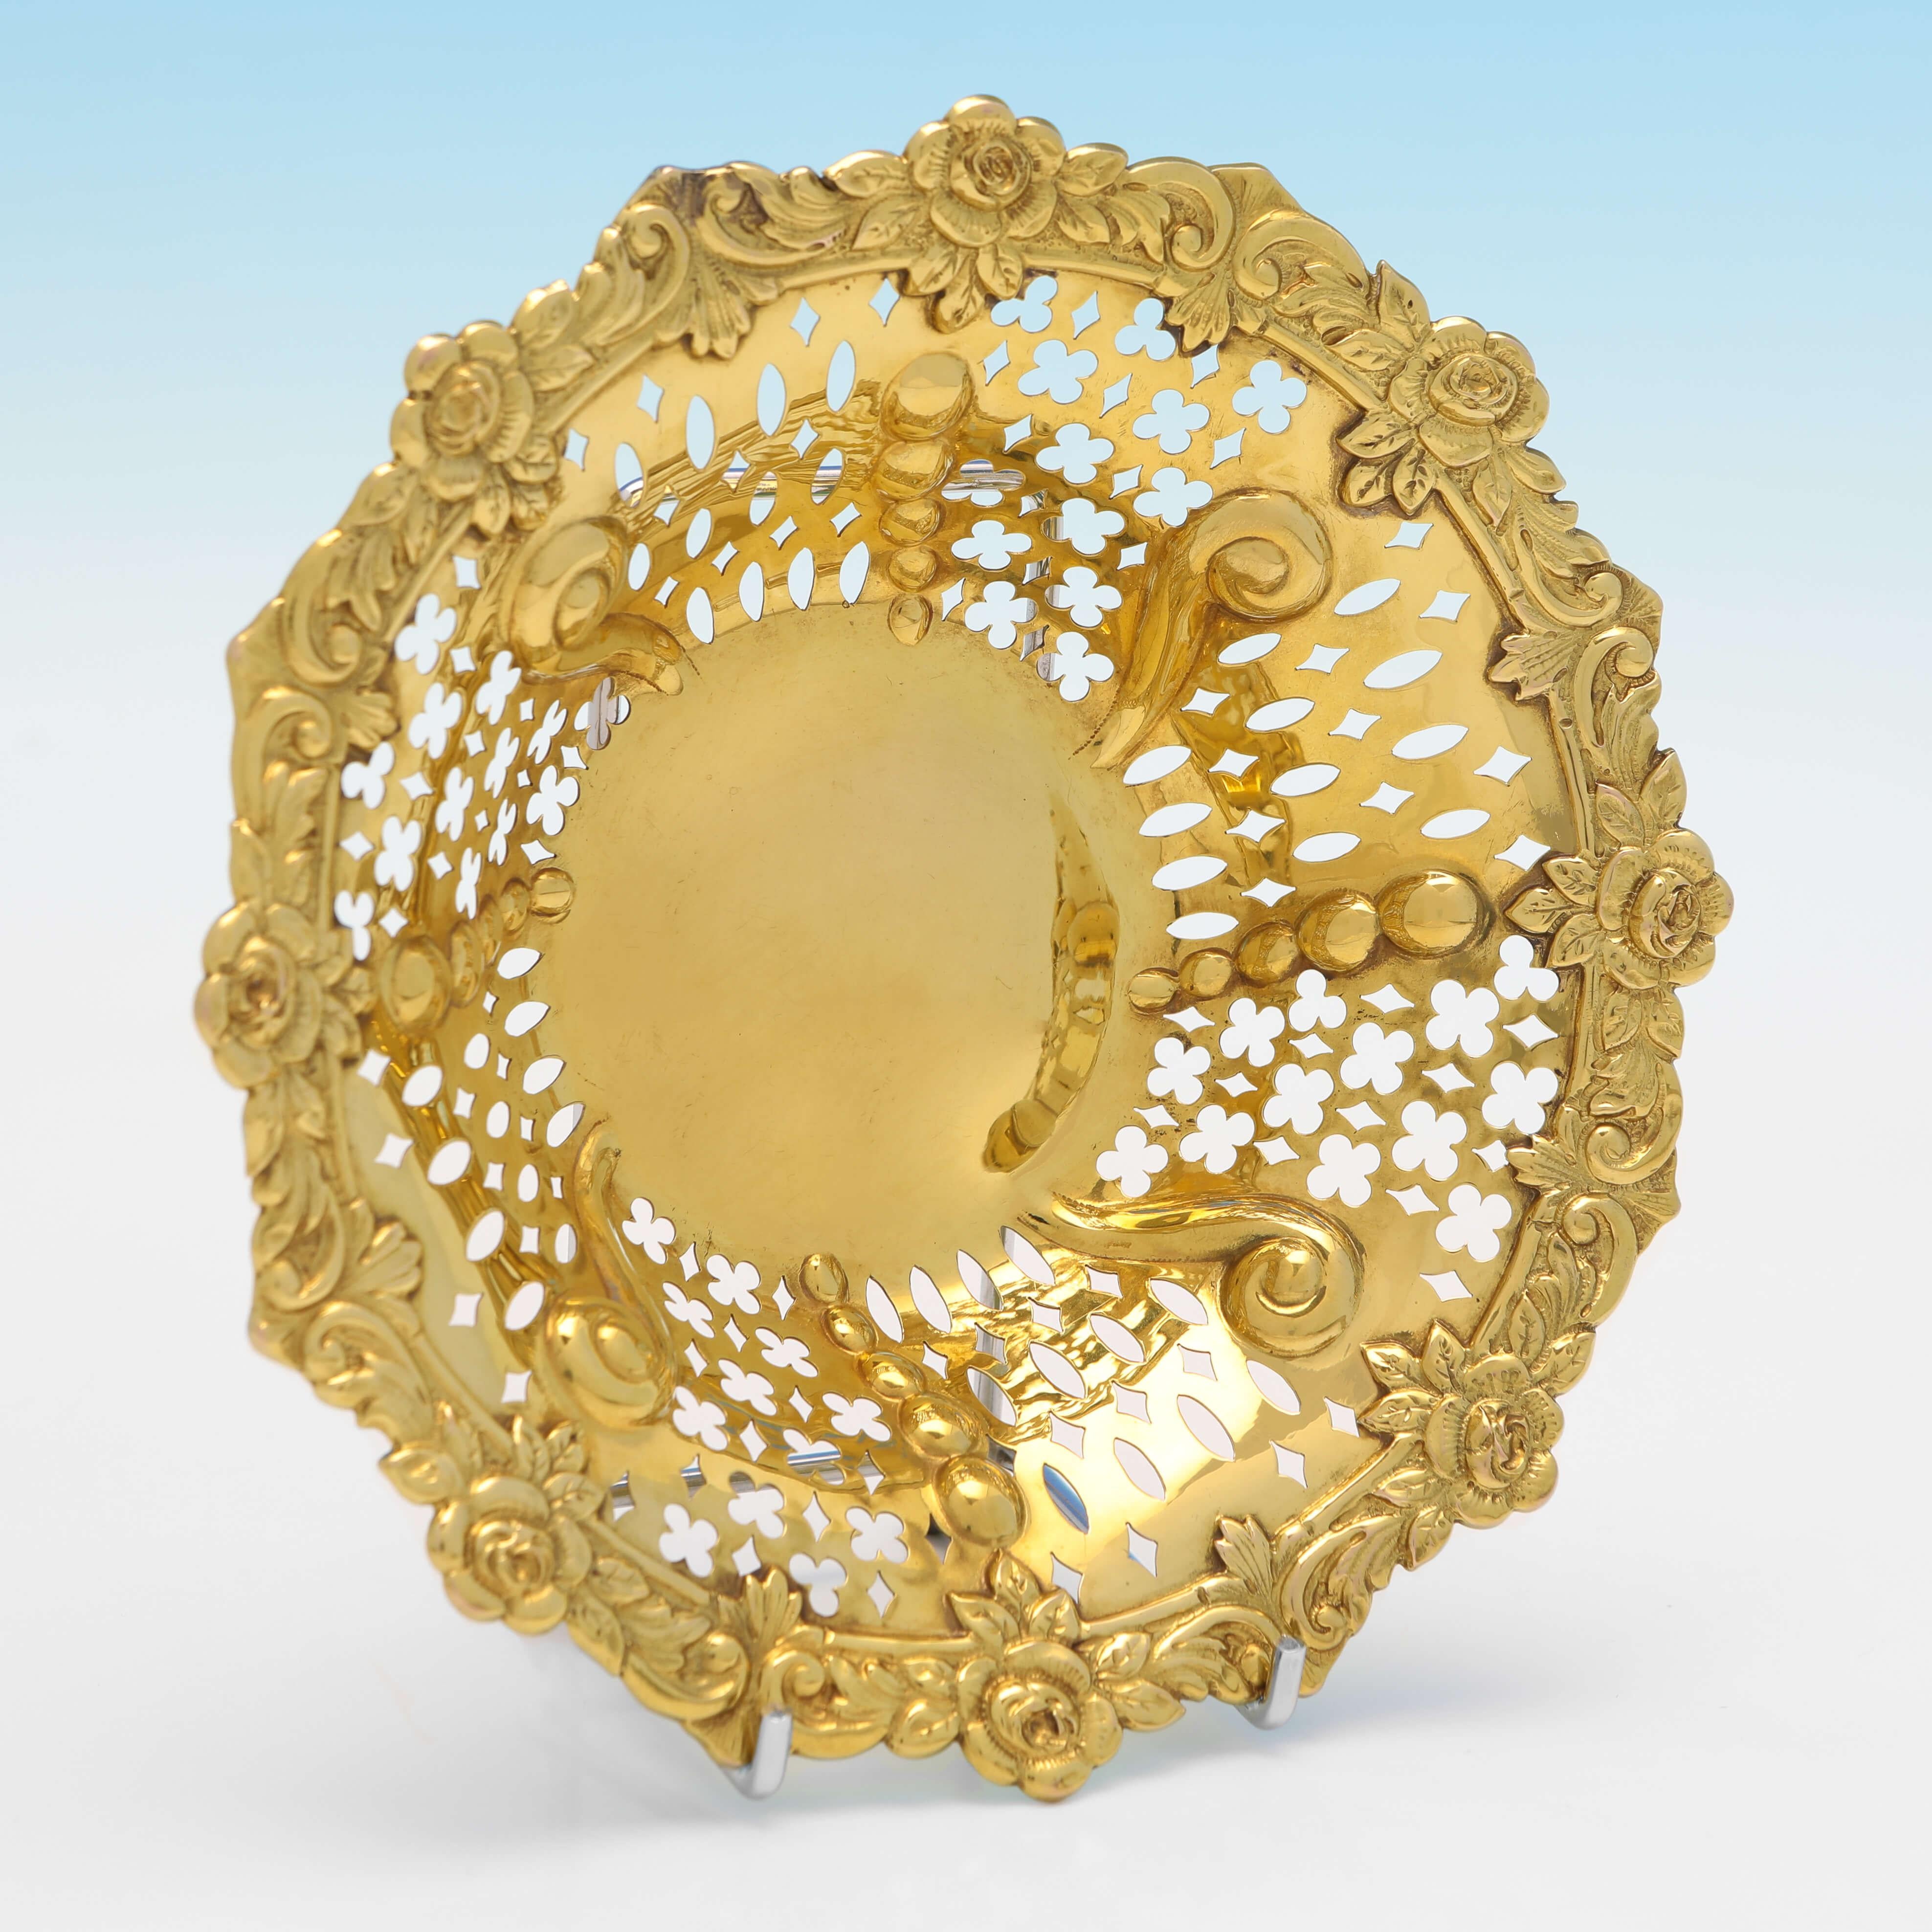 English A very rare Edwardian 9ct gold dish by Mappin & Webb - London 1903 - 142.4g For Sale